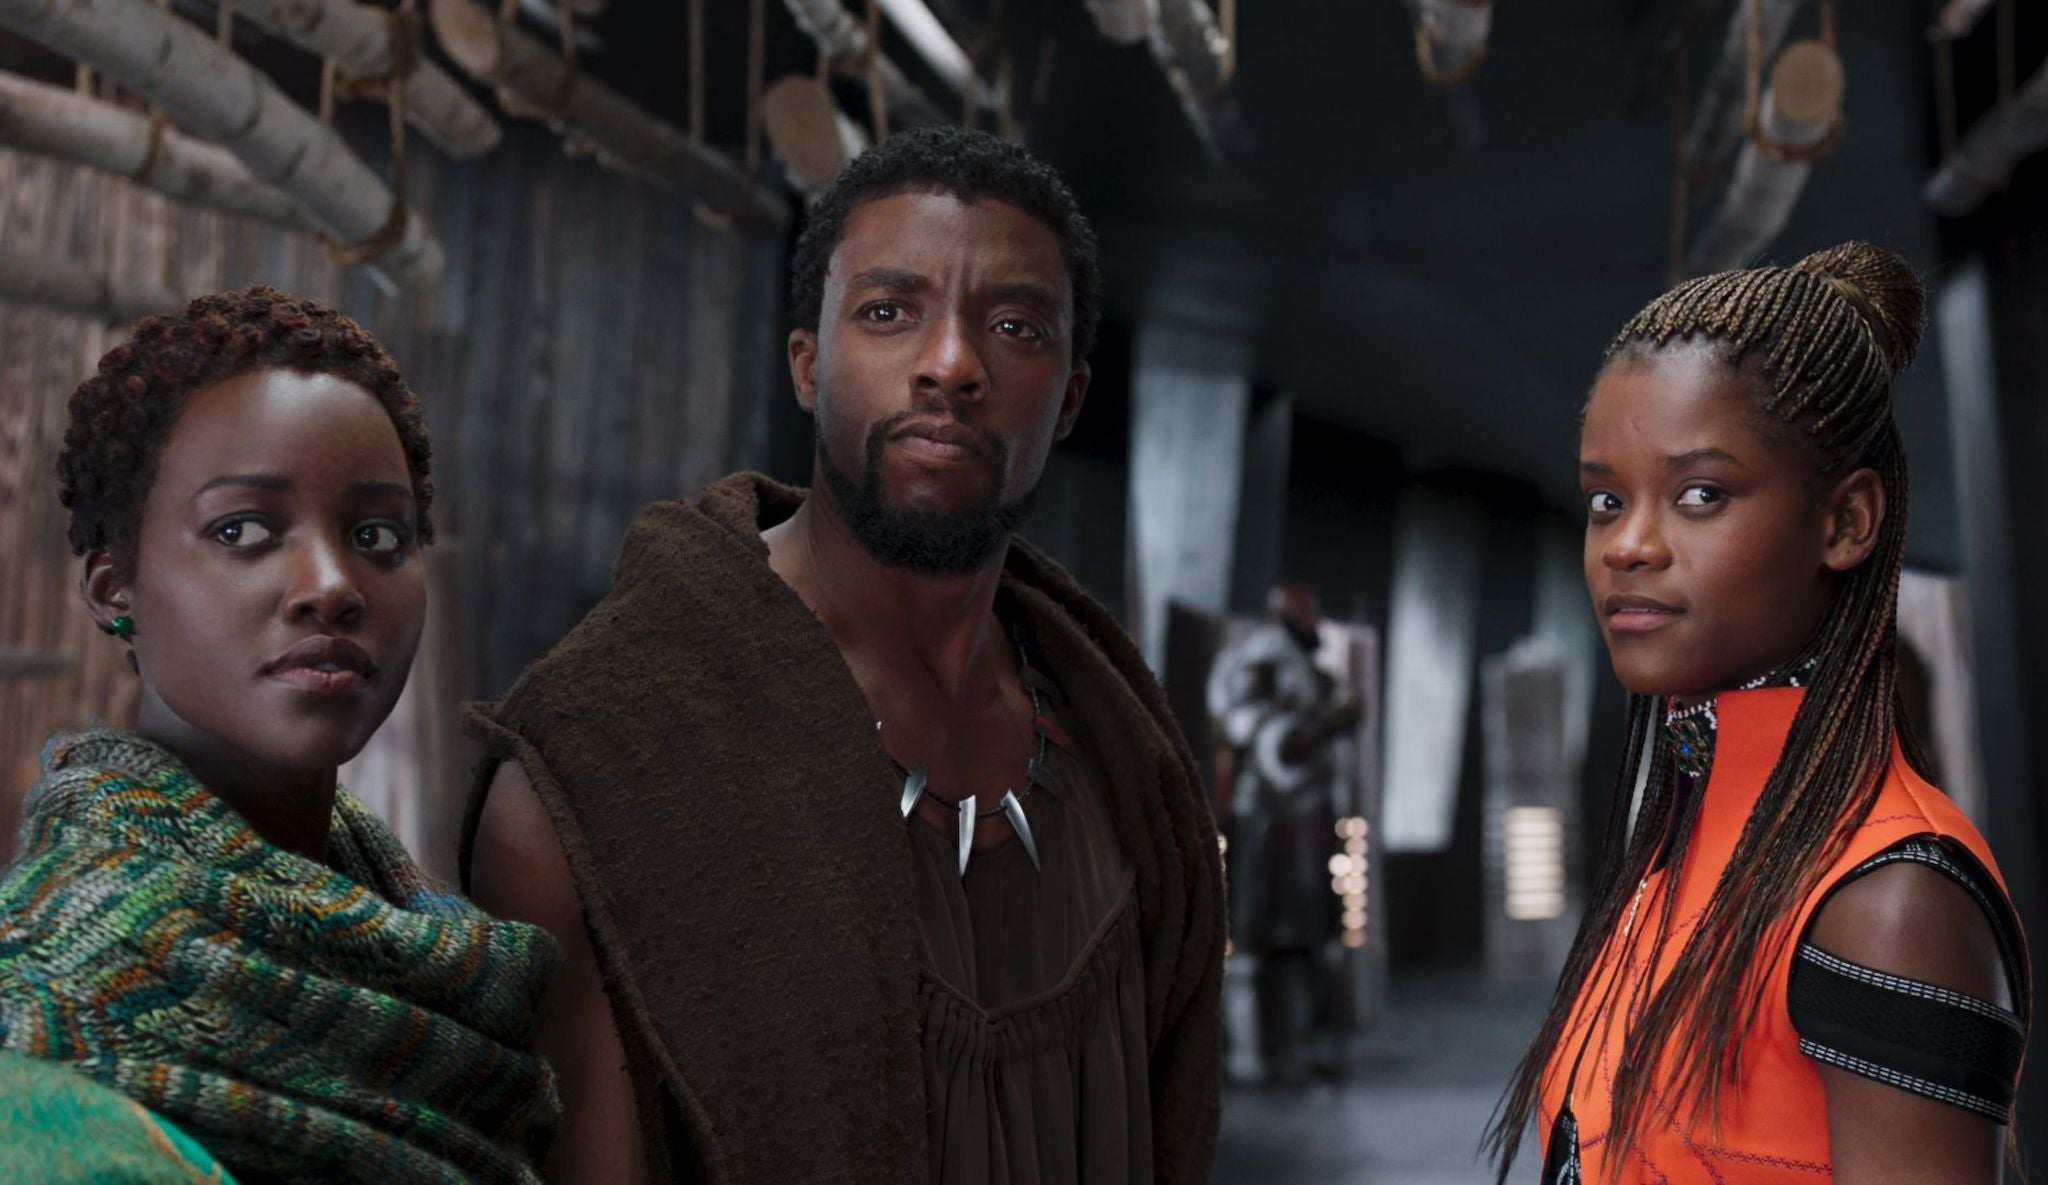 ‘Black Panther: Wakanda Forever’ is scheduled to be released in November 2022